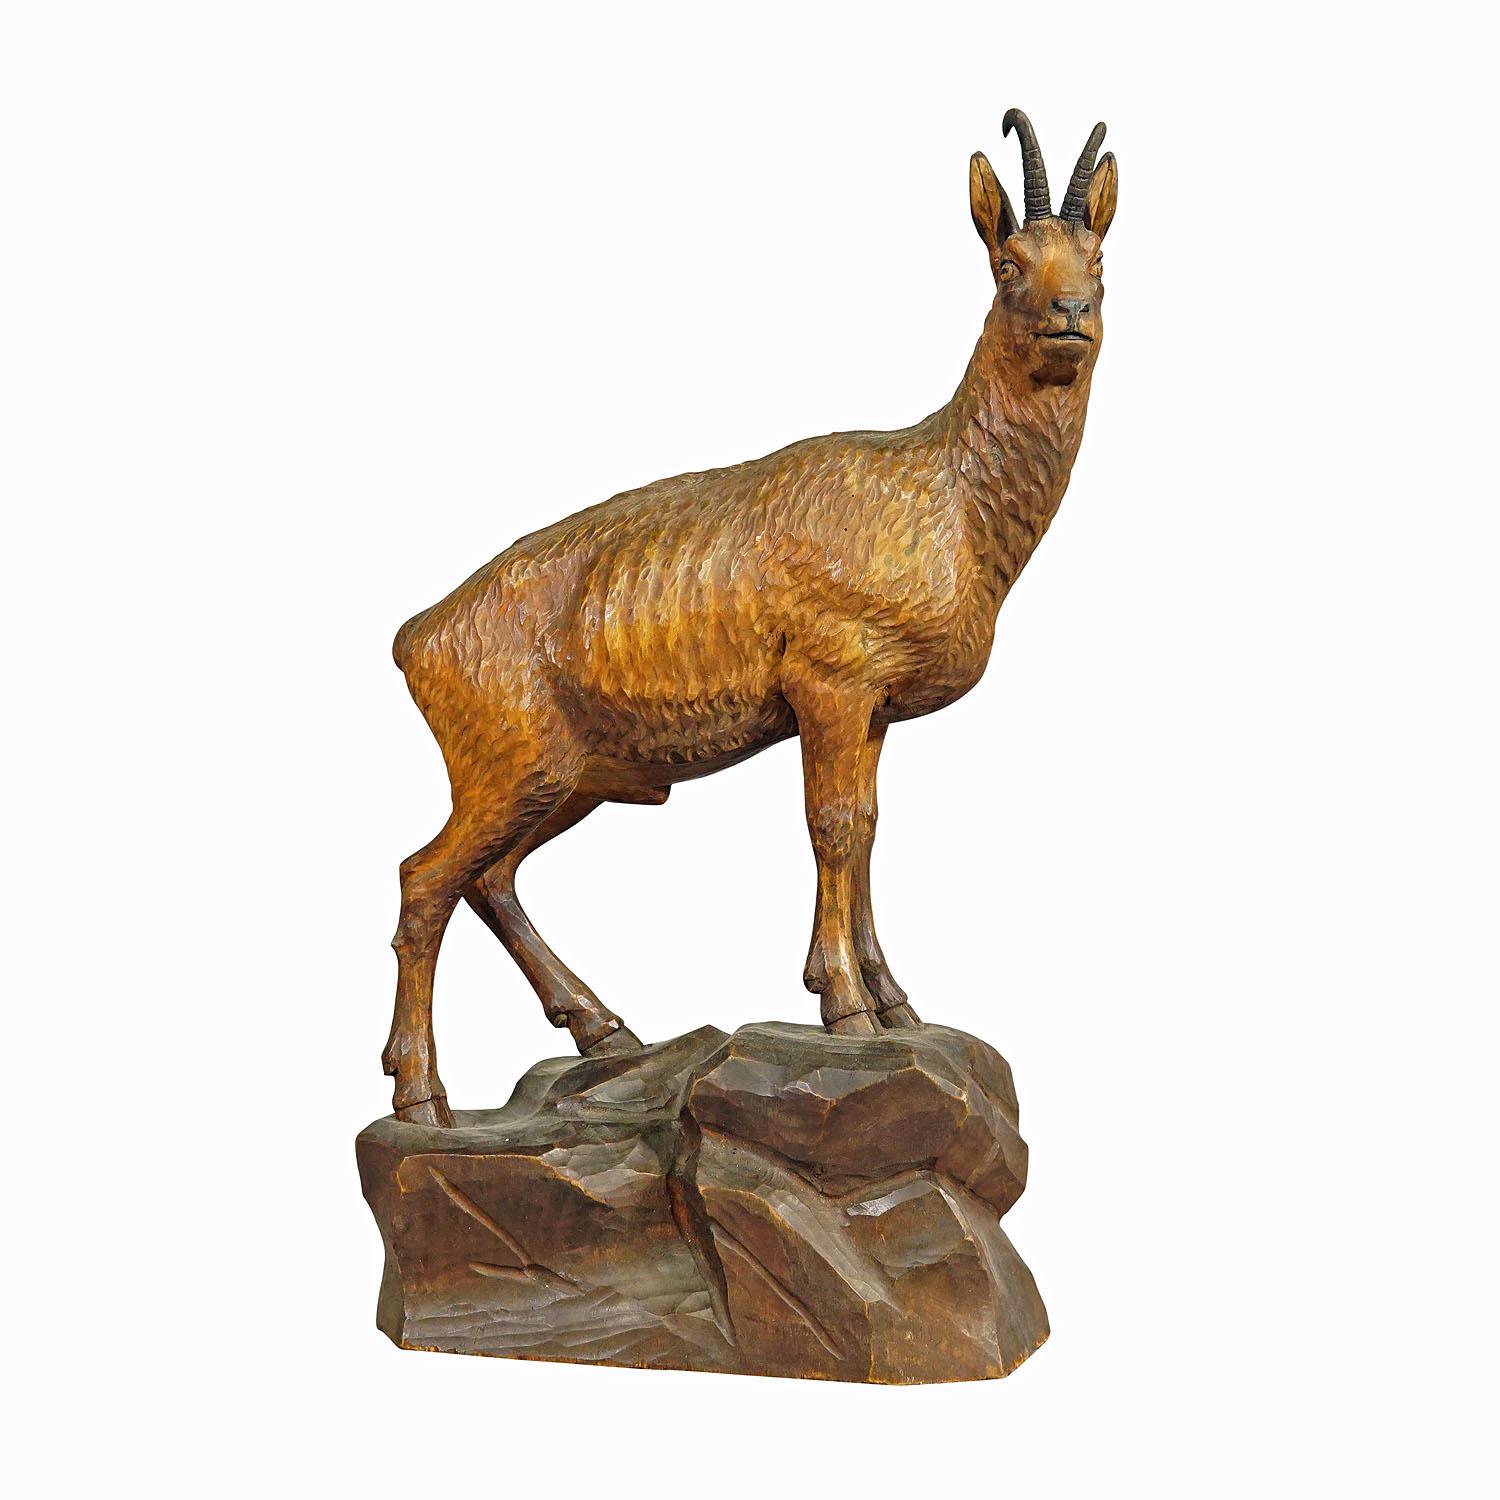 Finely carved wood Chamois Brienz, Switzerland, circa 1920

A delicately handcarved wood sculpture of a chamois. A very detailed and natural carving excecuted by one of the Swiss woodcarvers from the area of Brienz, circa 1920.

The tradition of